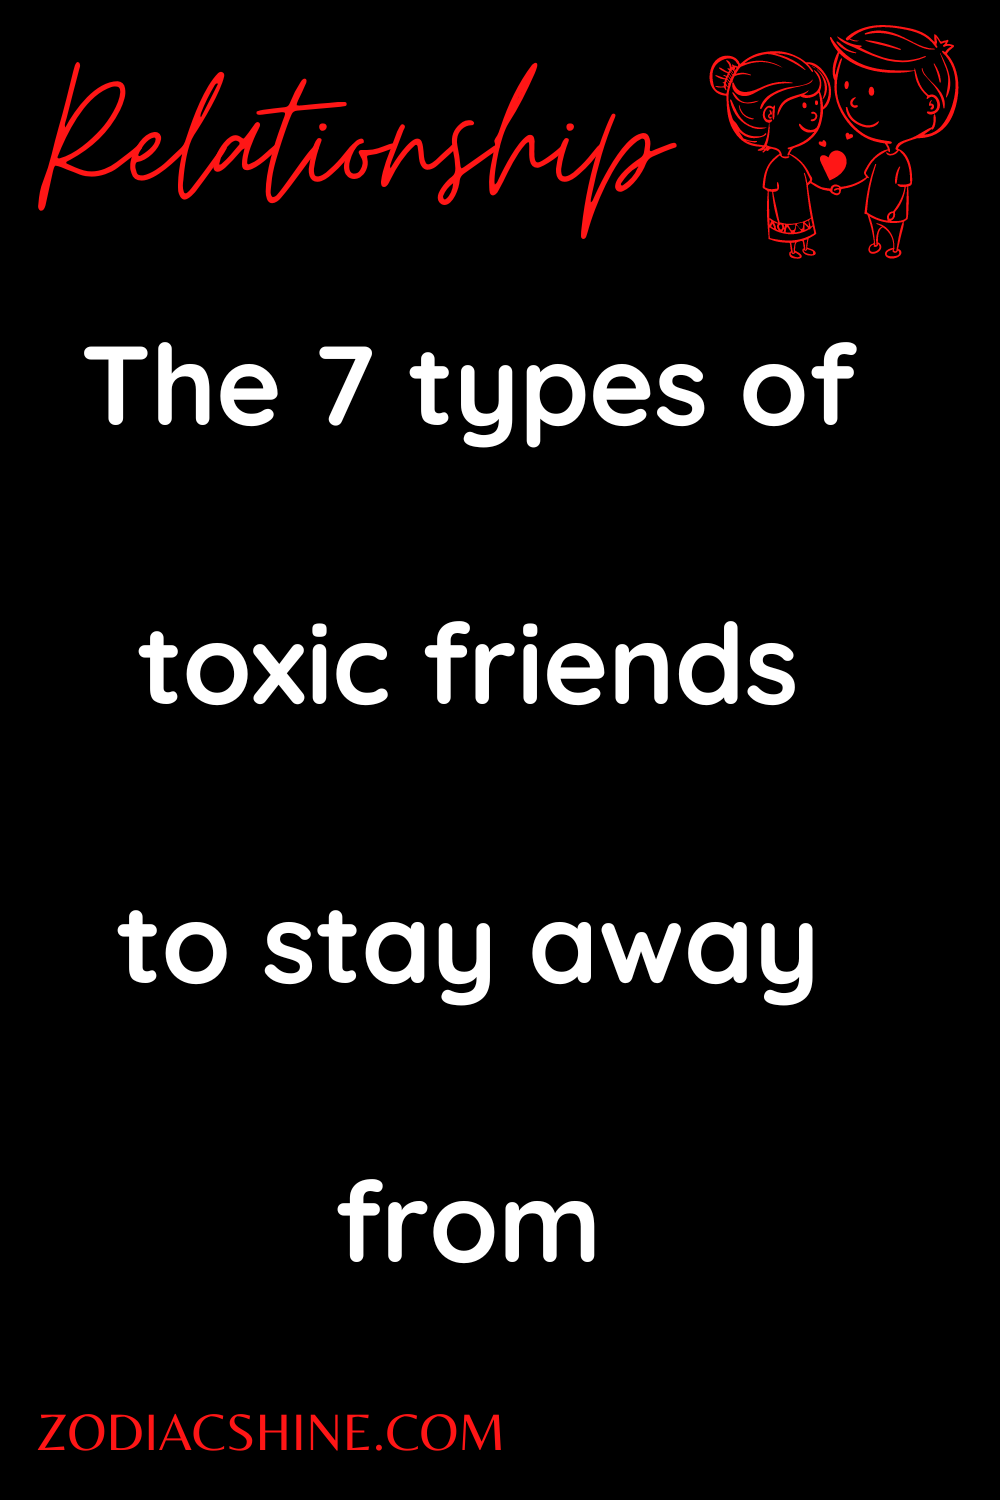 The 7 types of toxic friends to stay away from